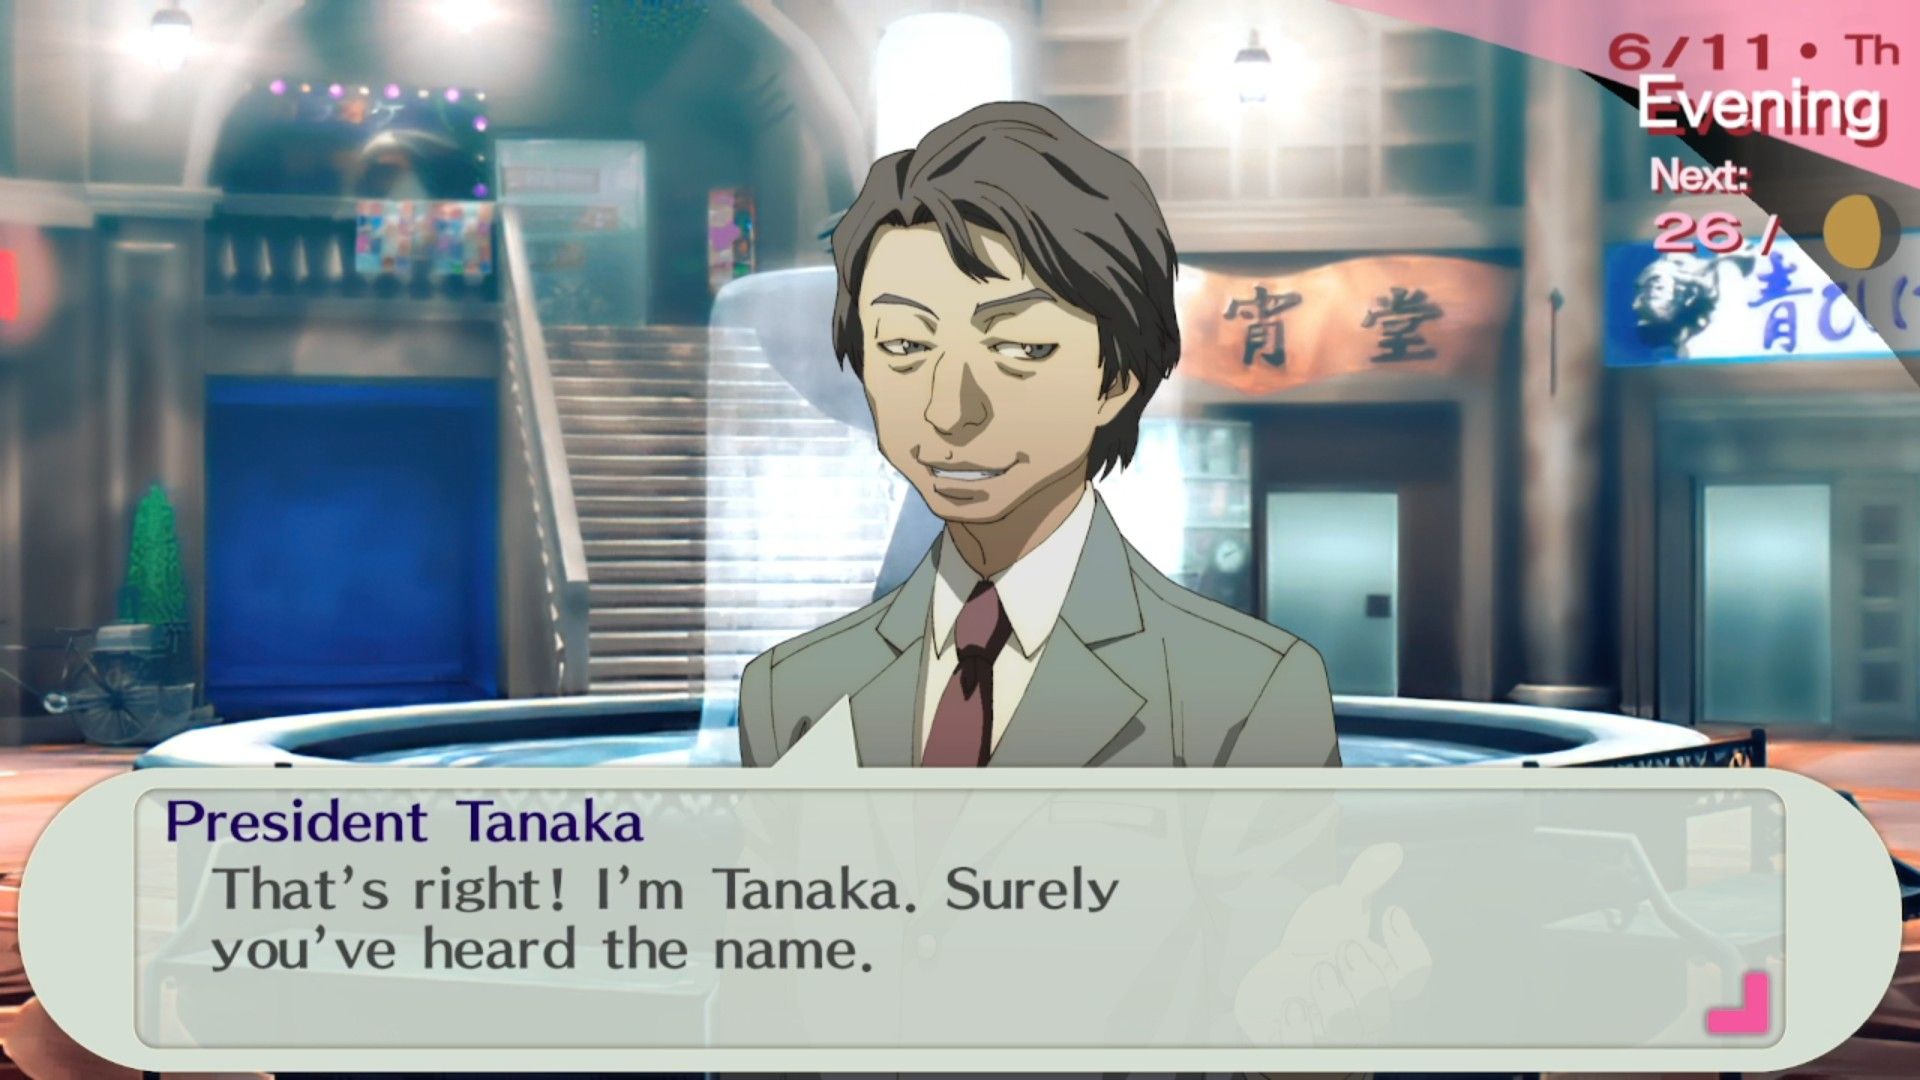 president tanaka smugly introducing himself to the protagonist